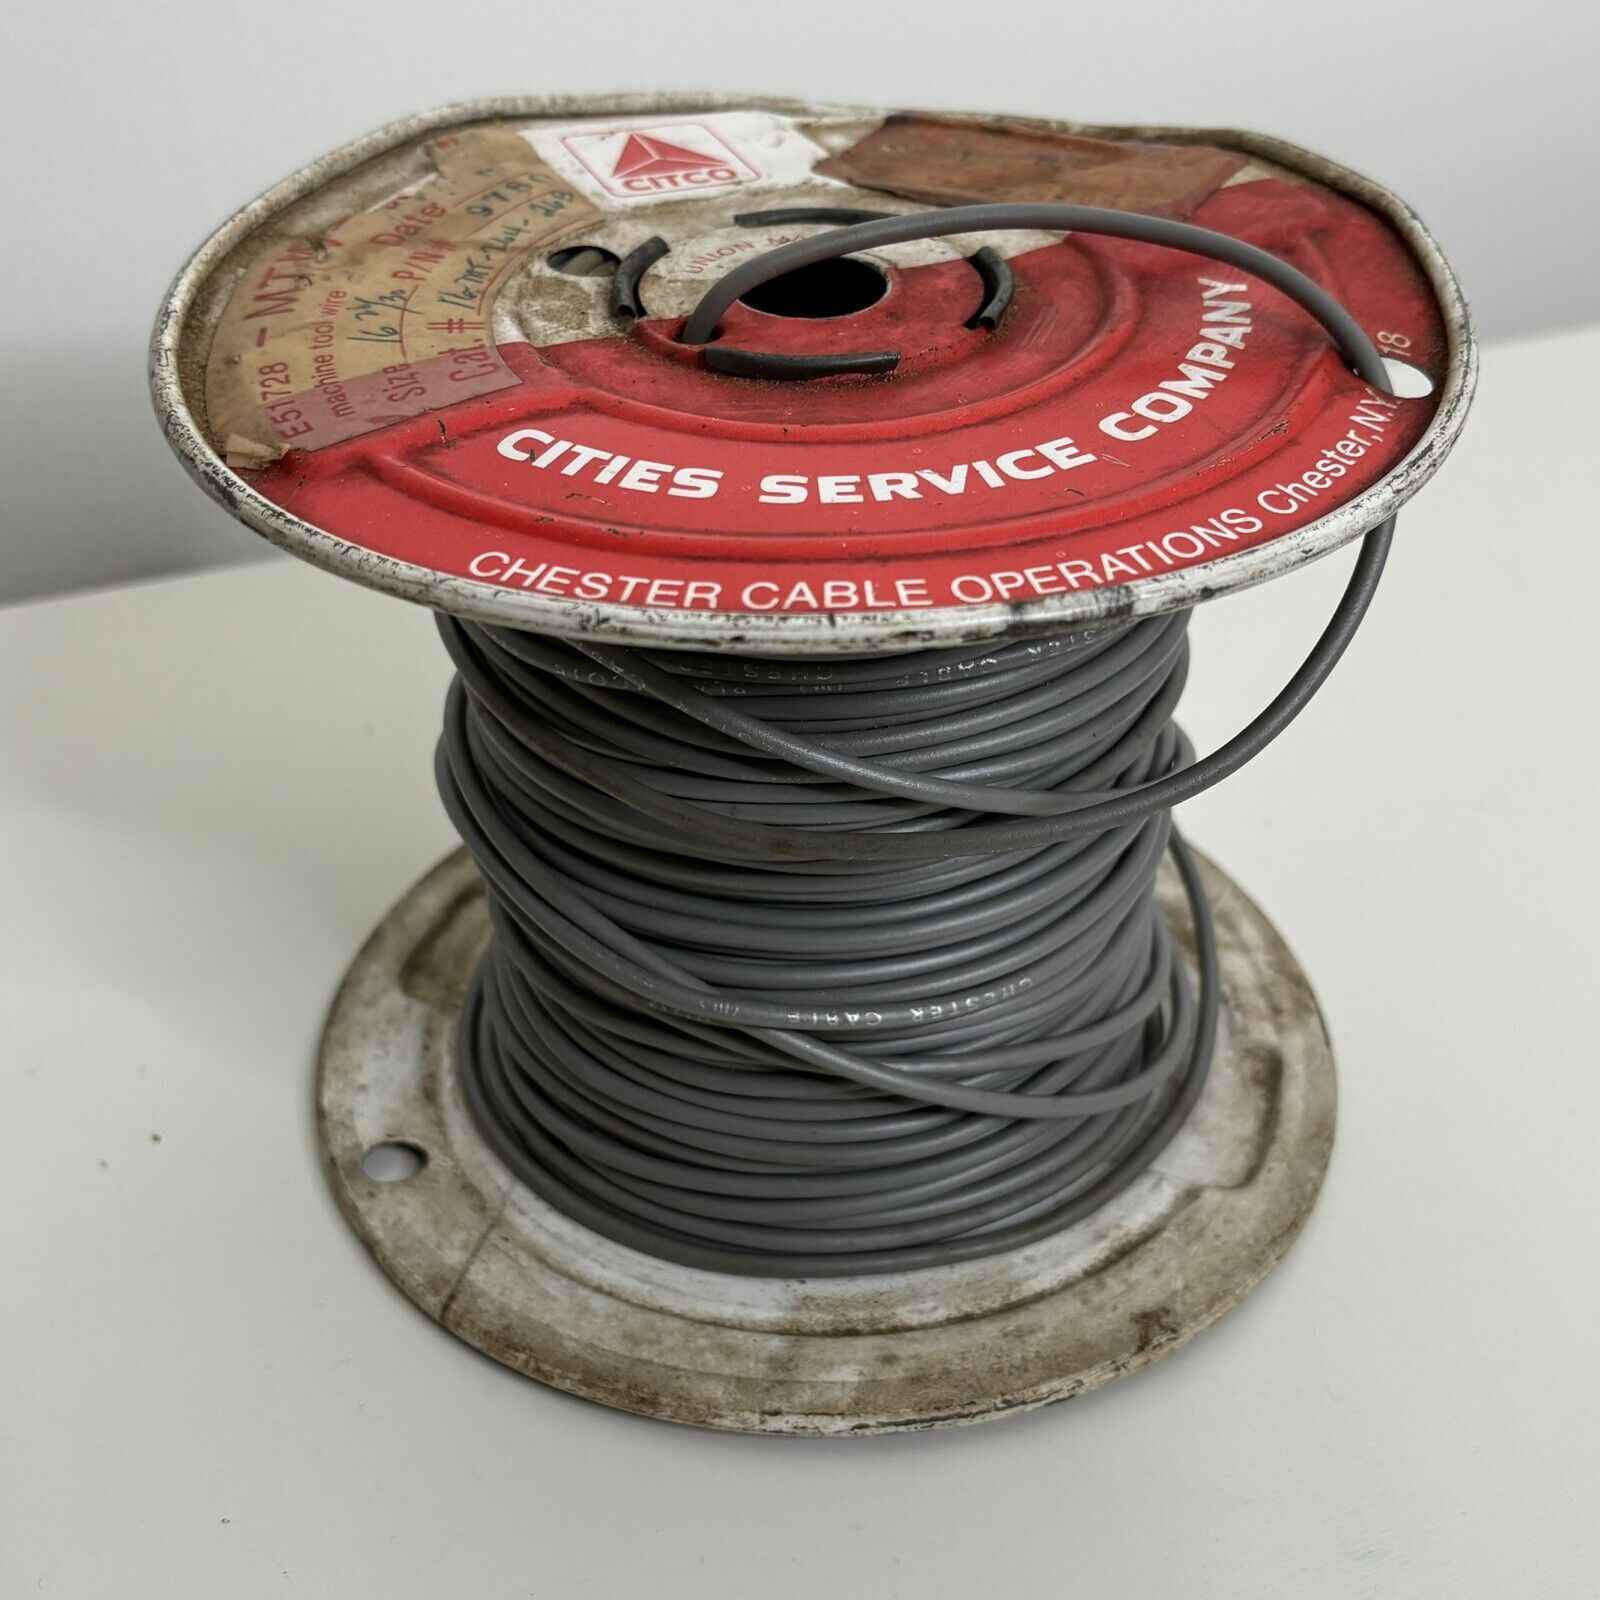 Vintage Cities Service Advertising Copper Wire Spool Citco Chester Cable 3.7lbs